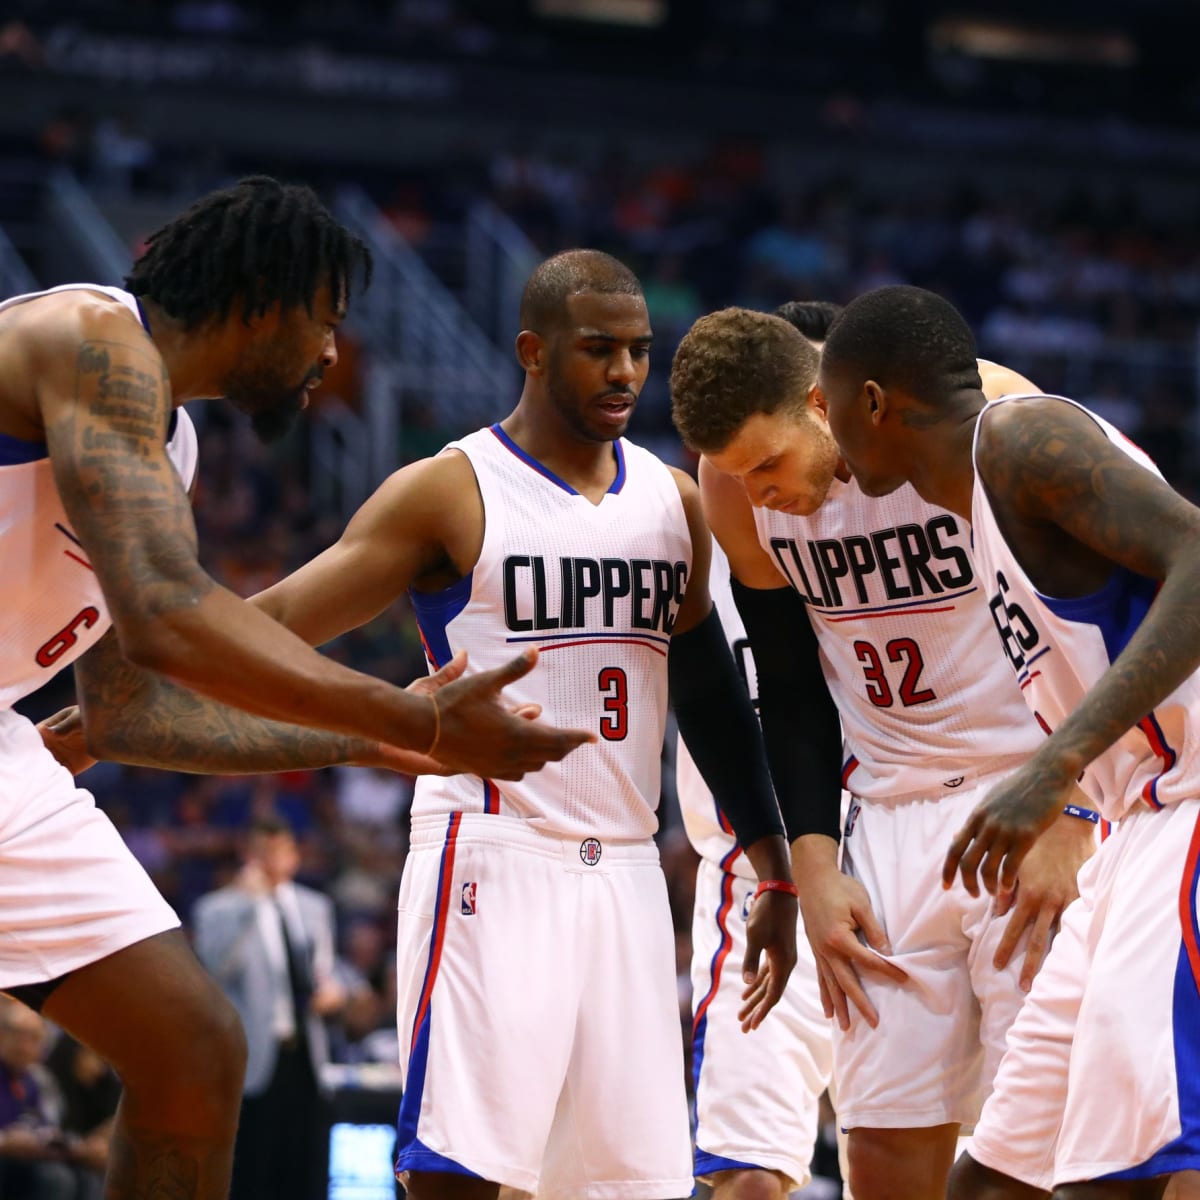 Chris Paul back amid quieter offseason for 'Lob City' Clippers